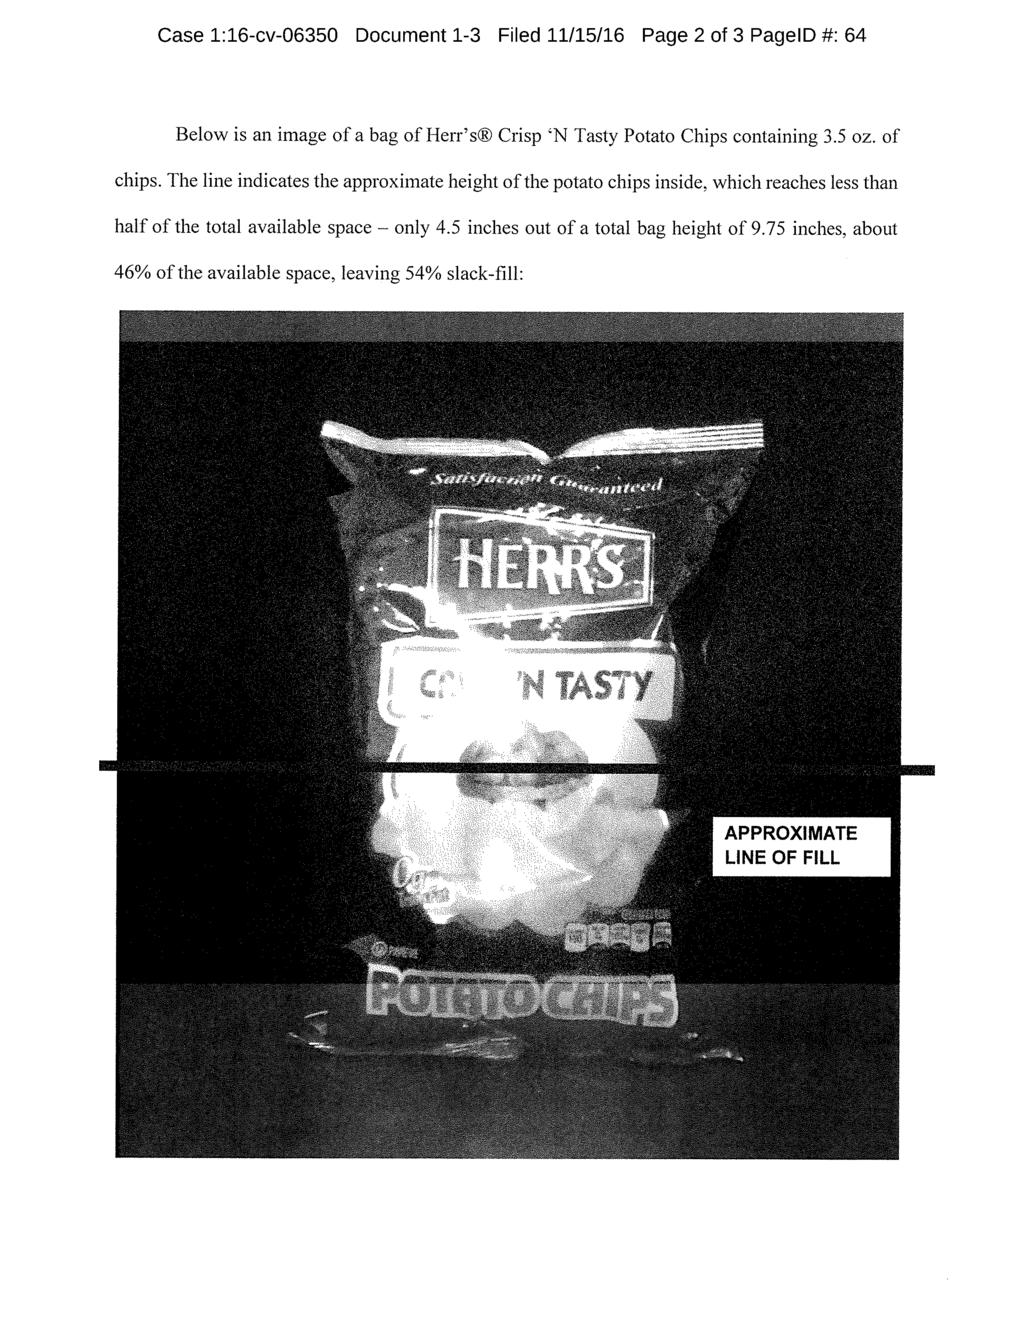 Case 1:16-cv-06350 Document 1-3 Filed 11/15/16 Page 2 of 3 PagelD 64 Below is an image of a bag of Herr's Crisp 'N Tasty Potato Chips containing 3.5 oz. of chips.